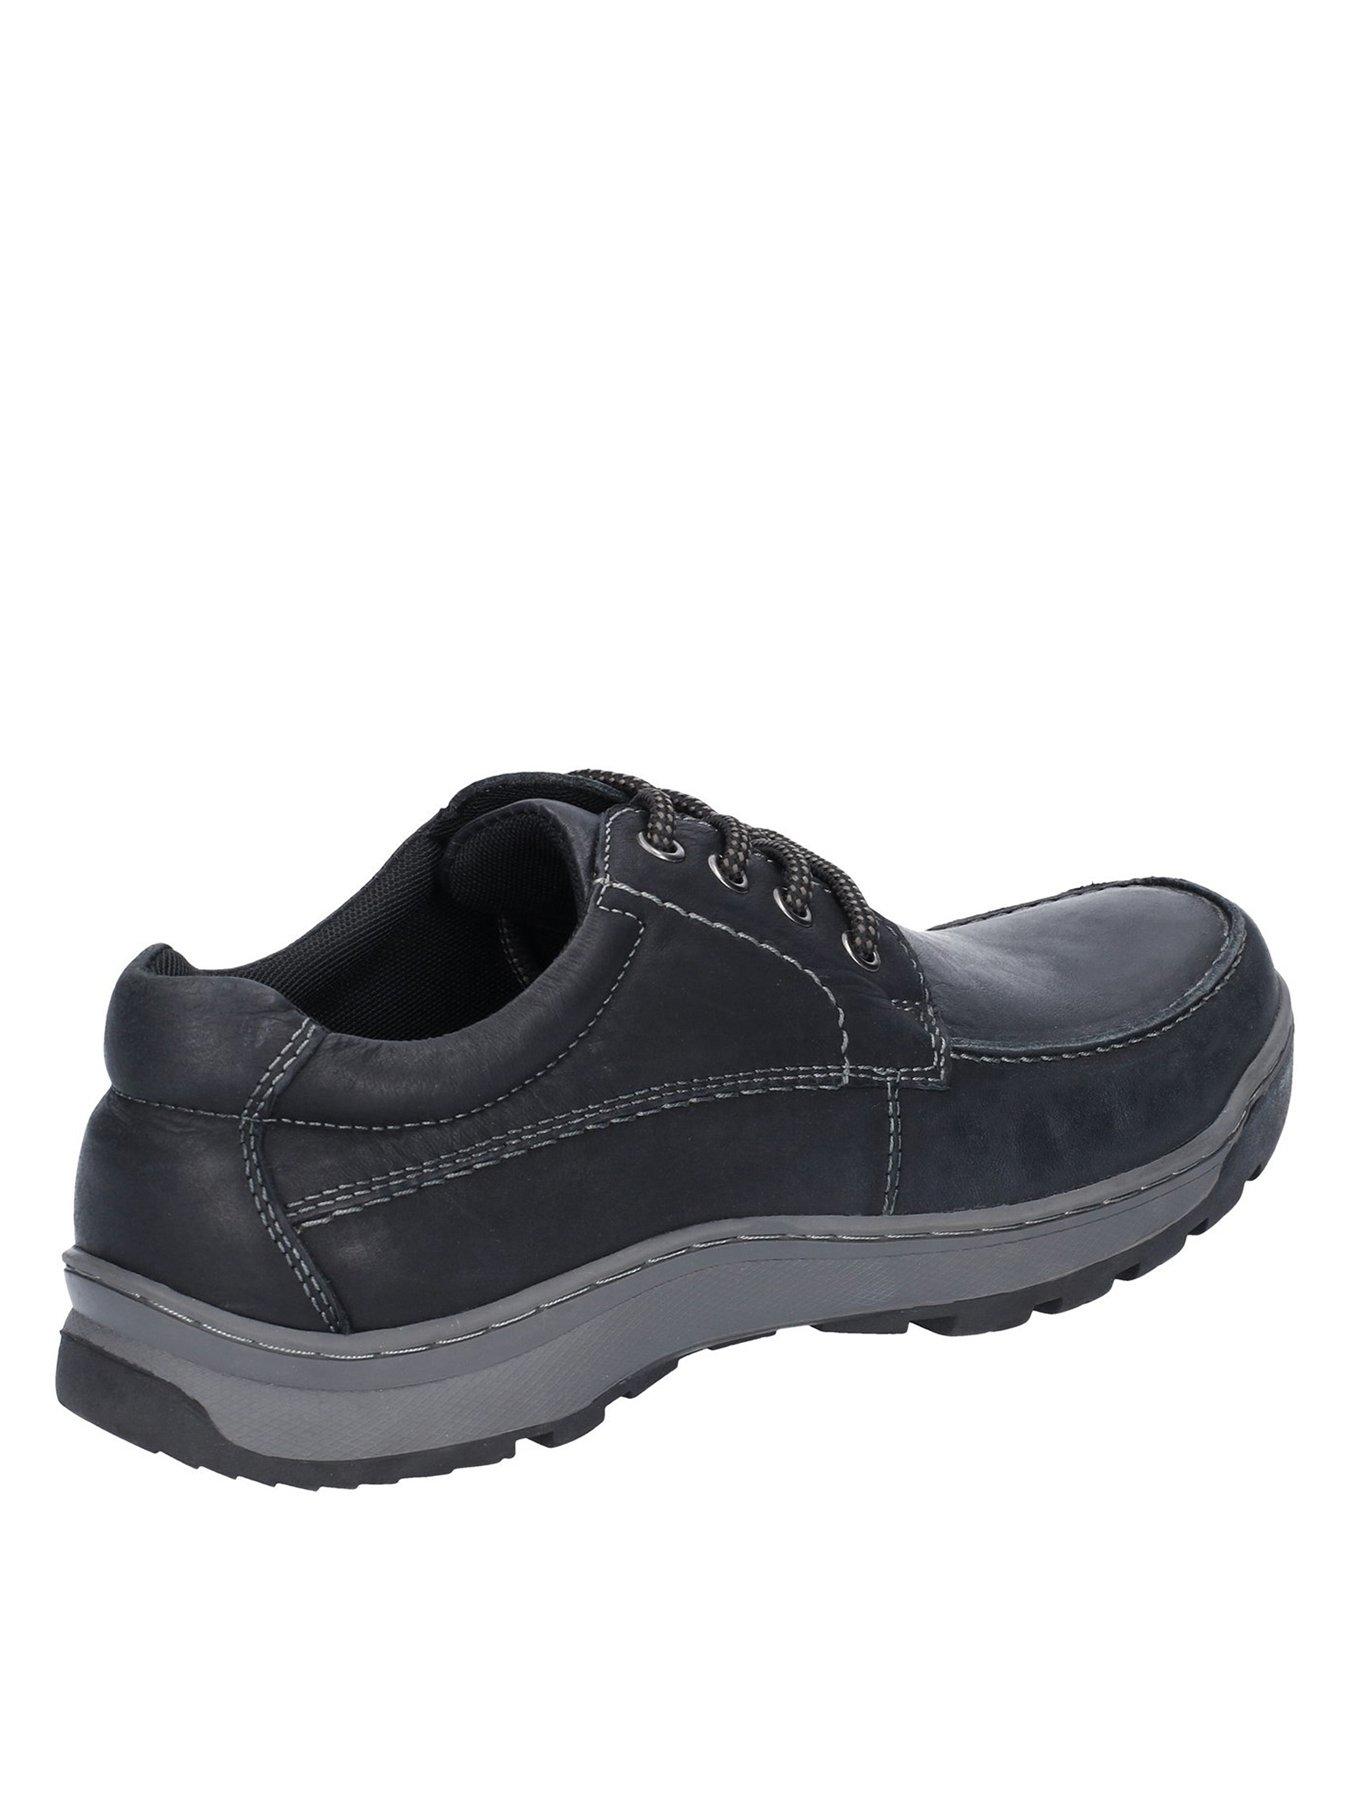 hush puppies price shoes